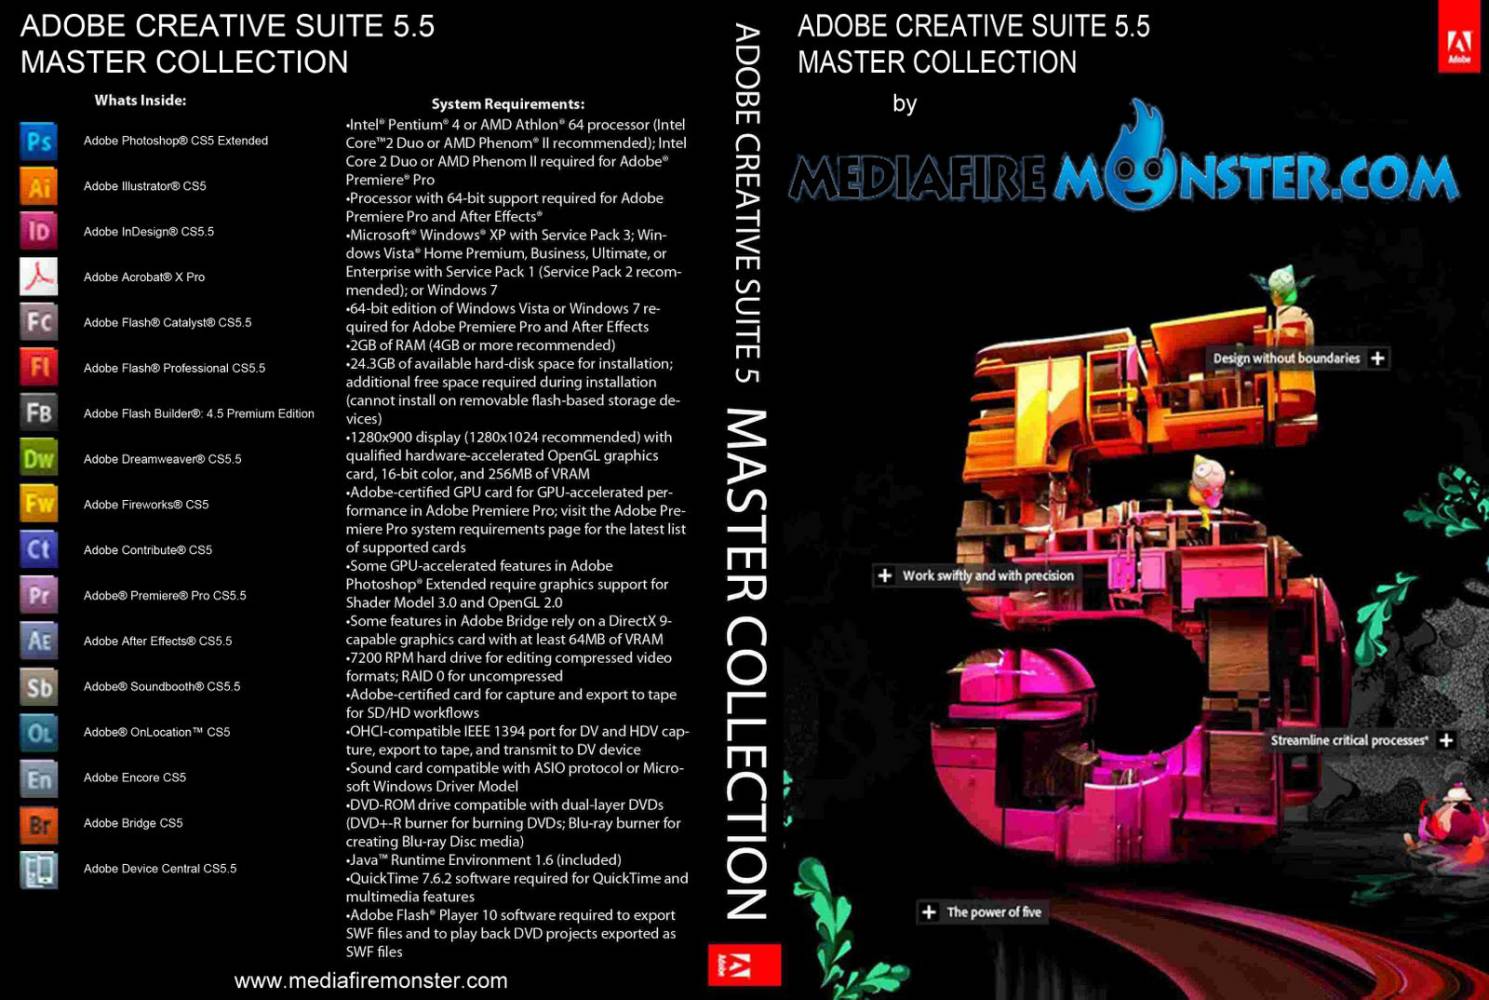 adobe creative suite 6 master collection free download with keygen